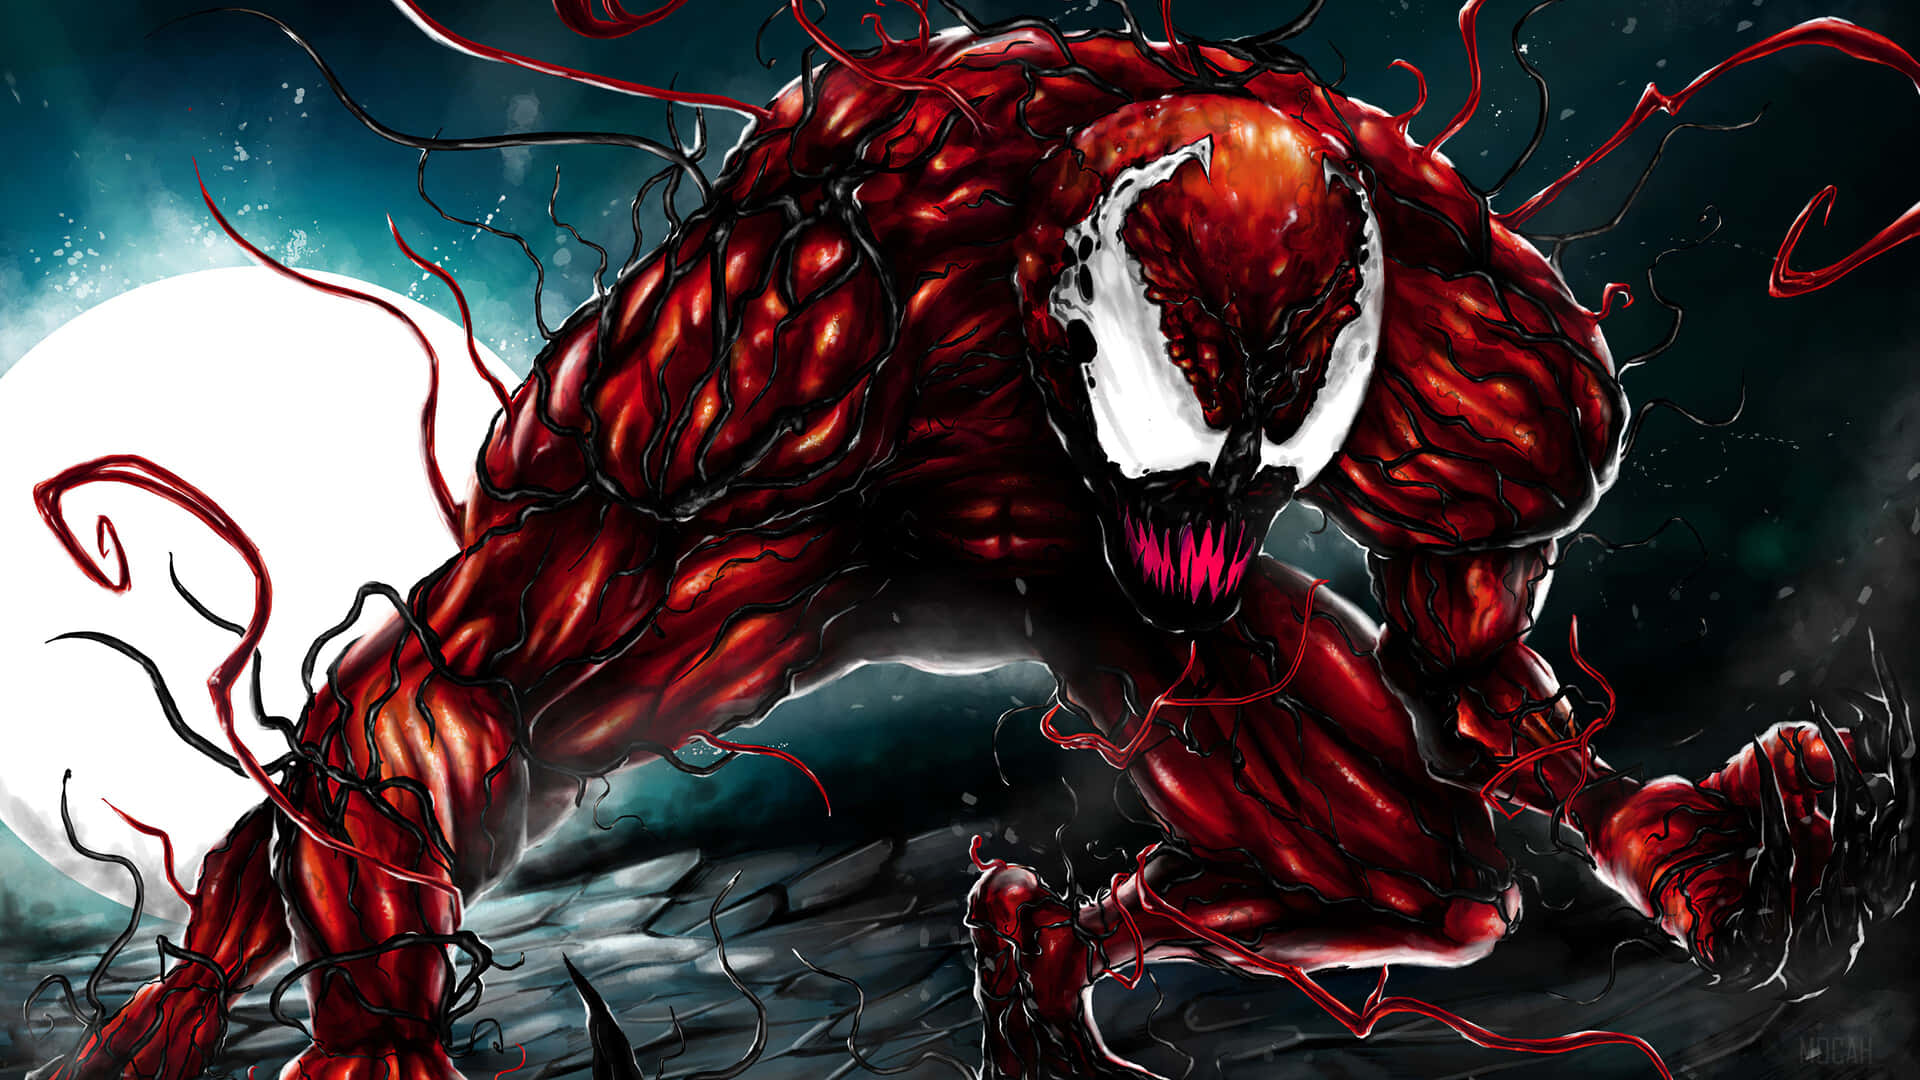 100+] Marvel Carnage Wallpapers